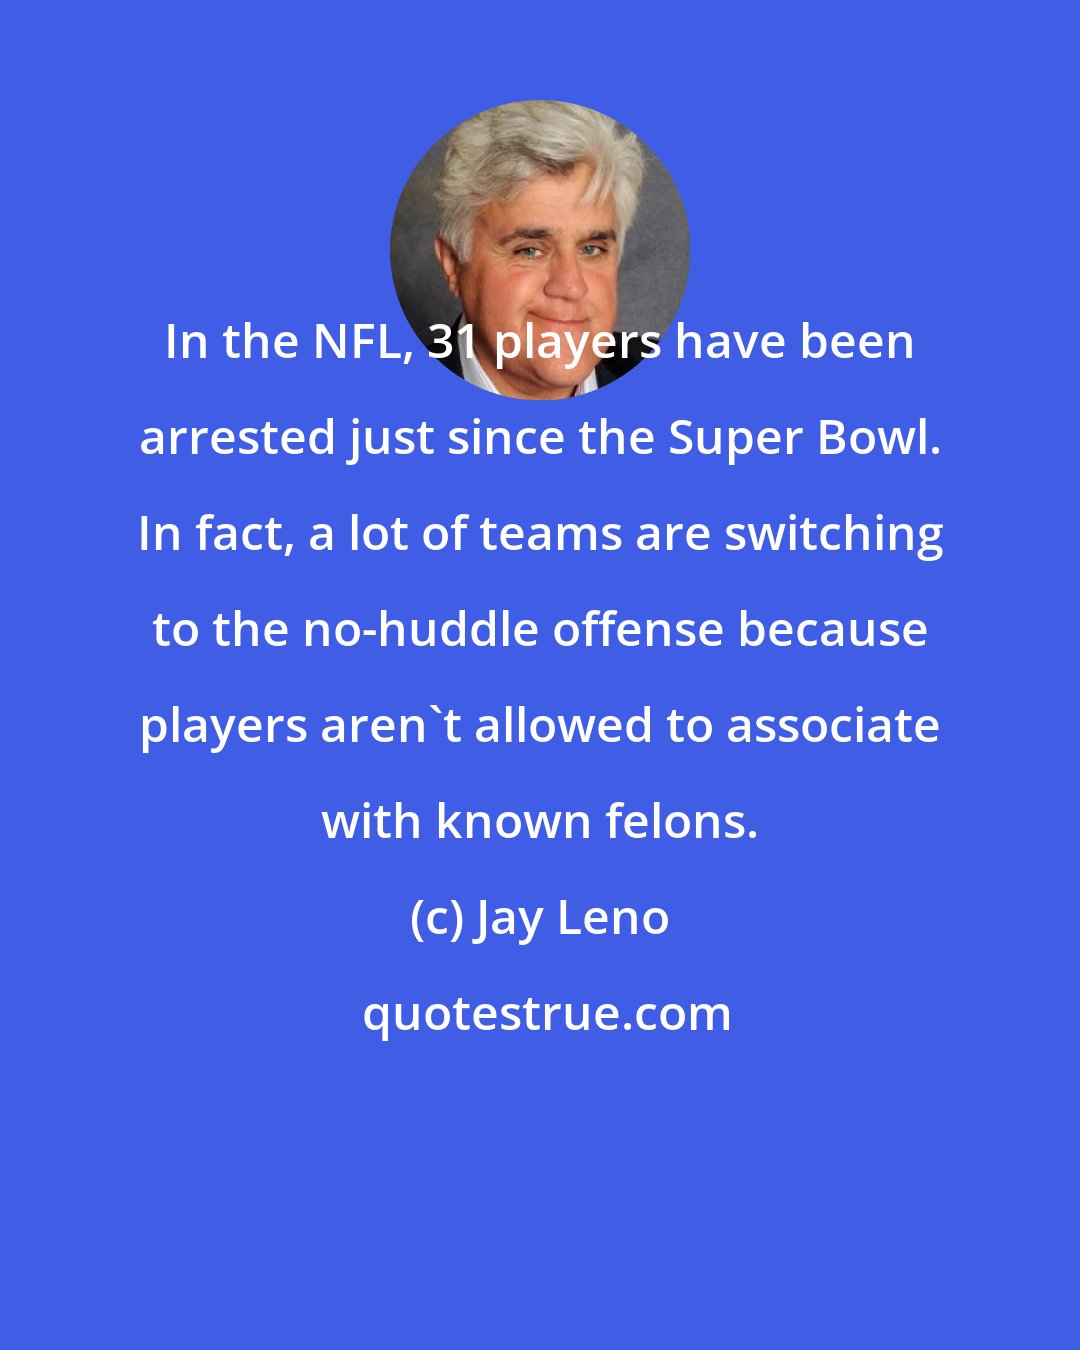 Jay Leno: In the NFL, 31 players have been arrested just since the Super Bowl. In fact, a lot of teams are switching to the no-huddle offense because players aren't allowed to associate with known felons.